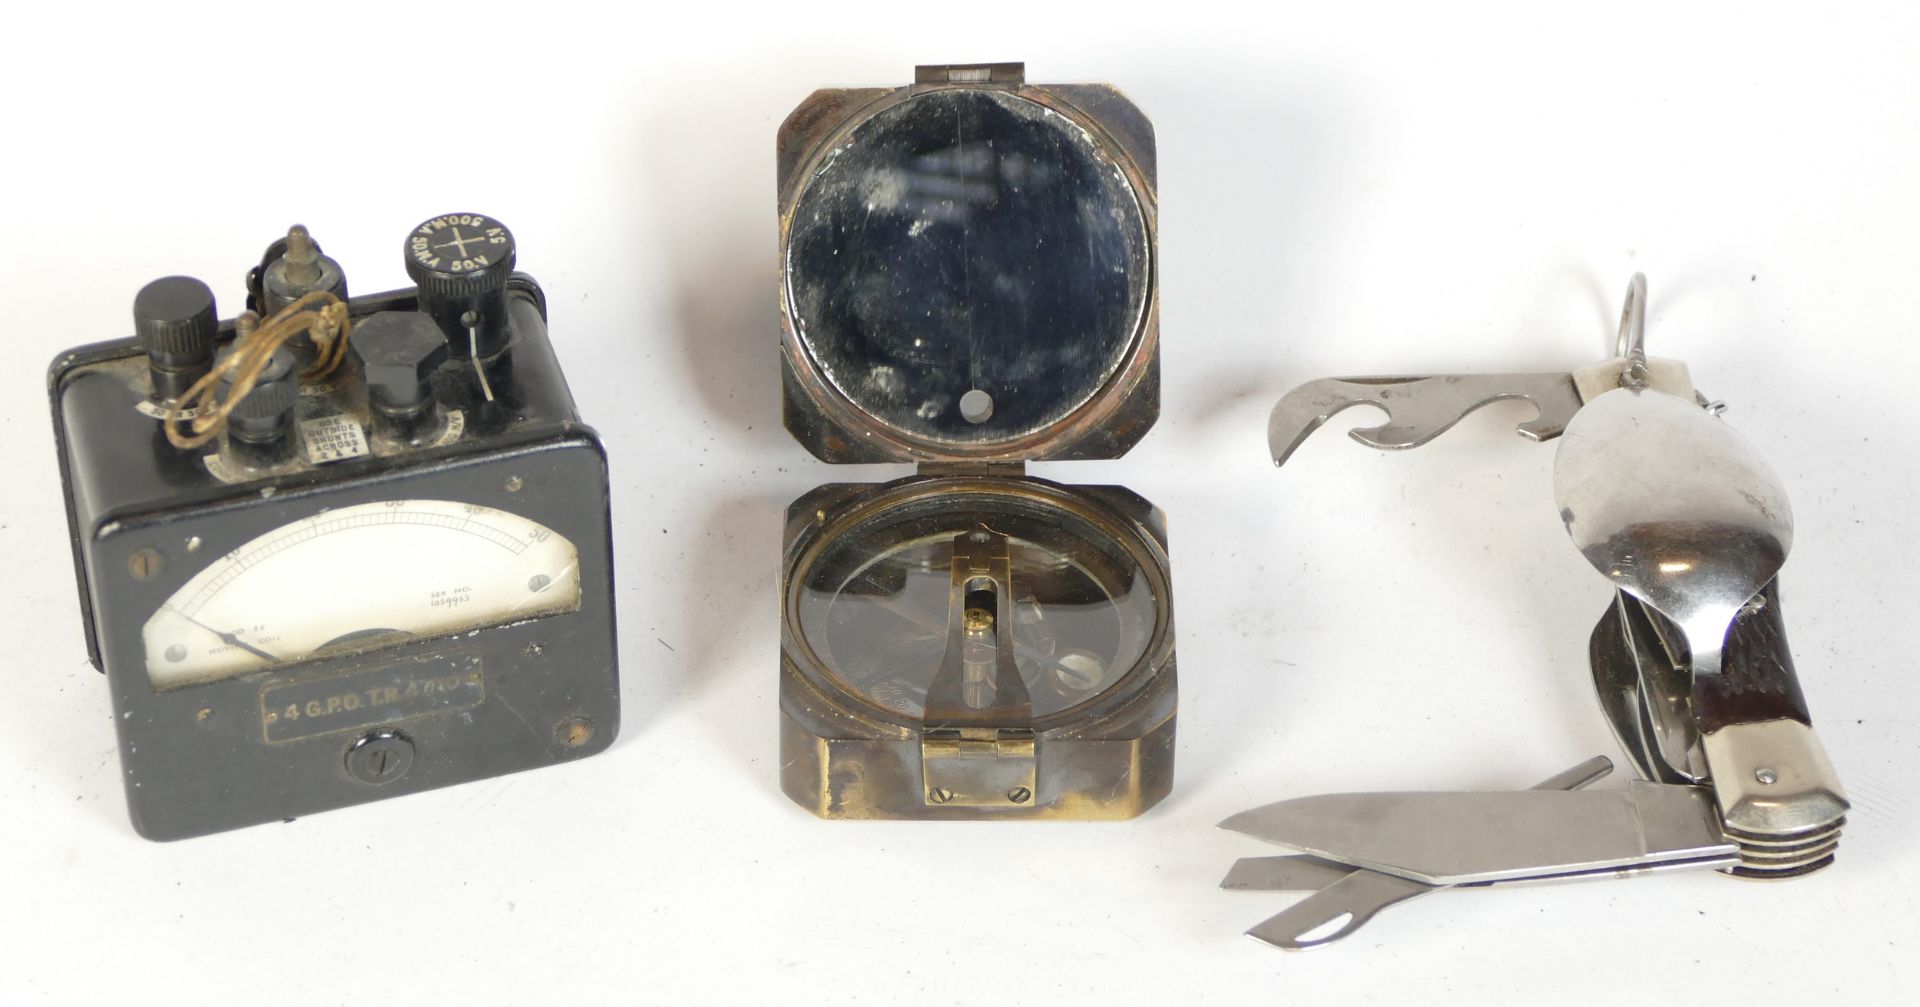 A Kelvin & Hughes 1917 brass compass, an electrical tester and a camping fork